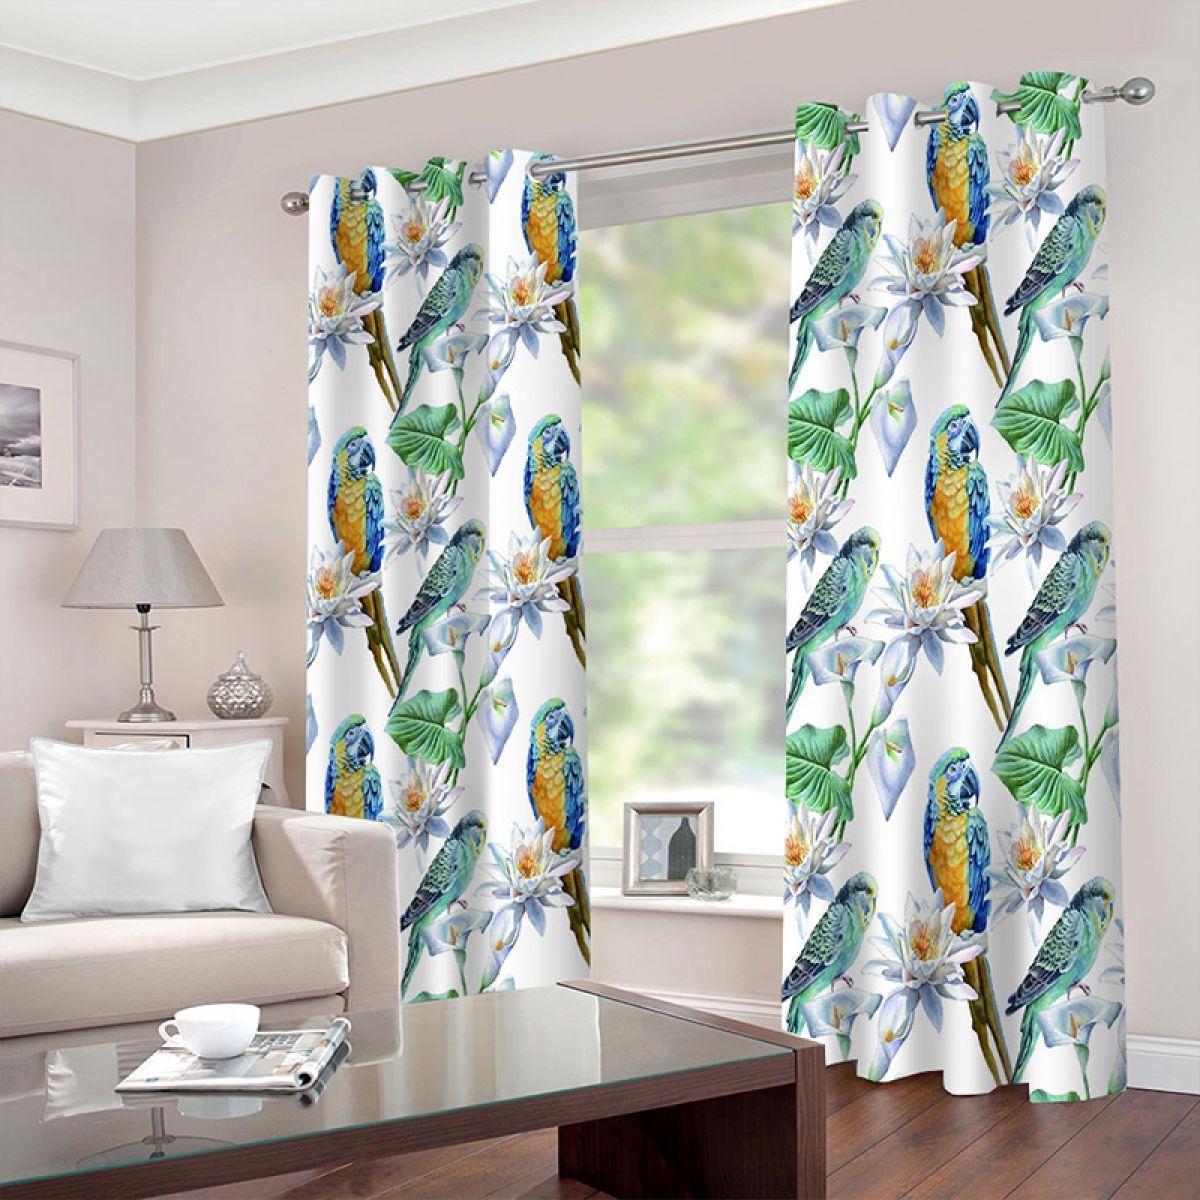 Parrots All Over Printed Window Curtain Home Decor